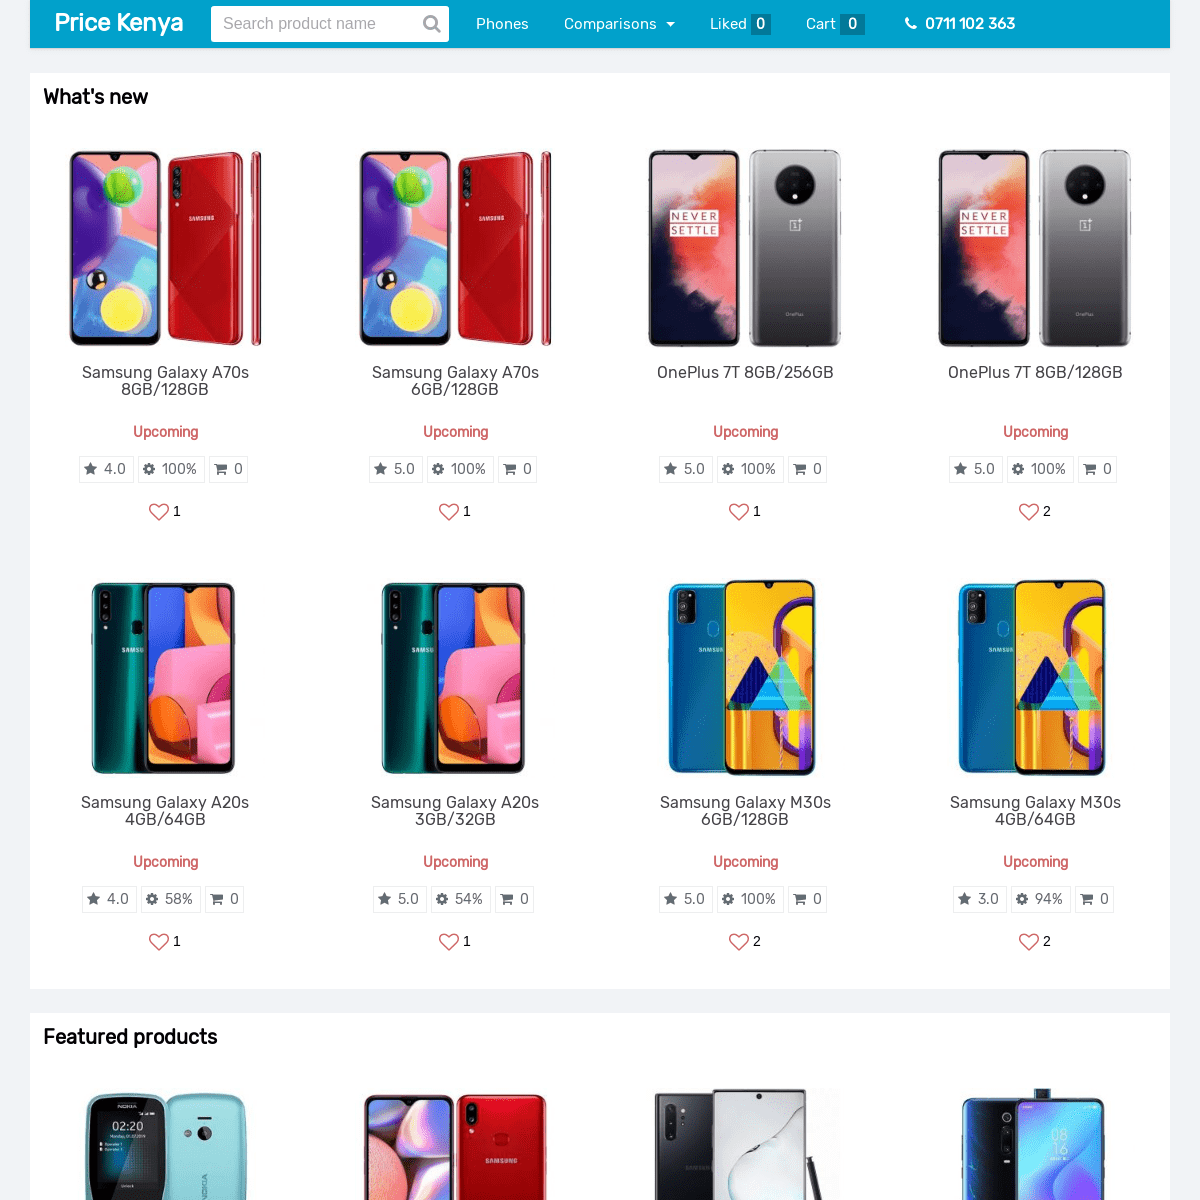 Online store for Mobile phones. Countrywide delivery | Price Kenya